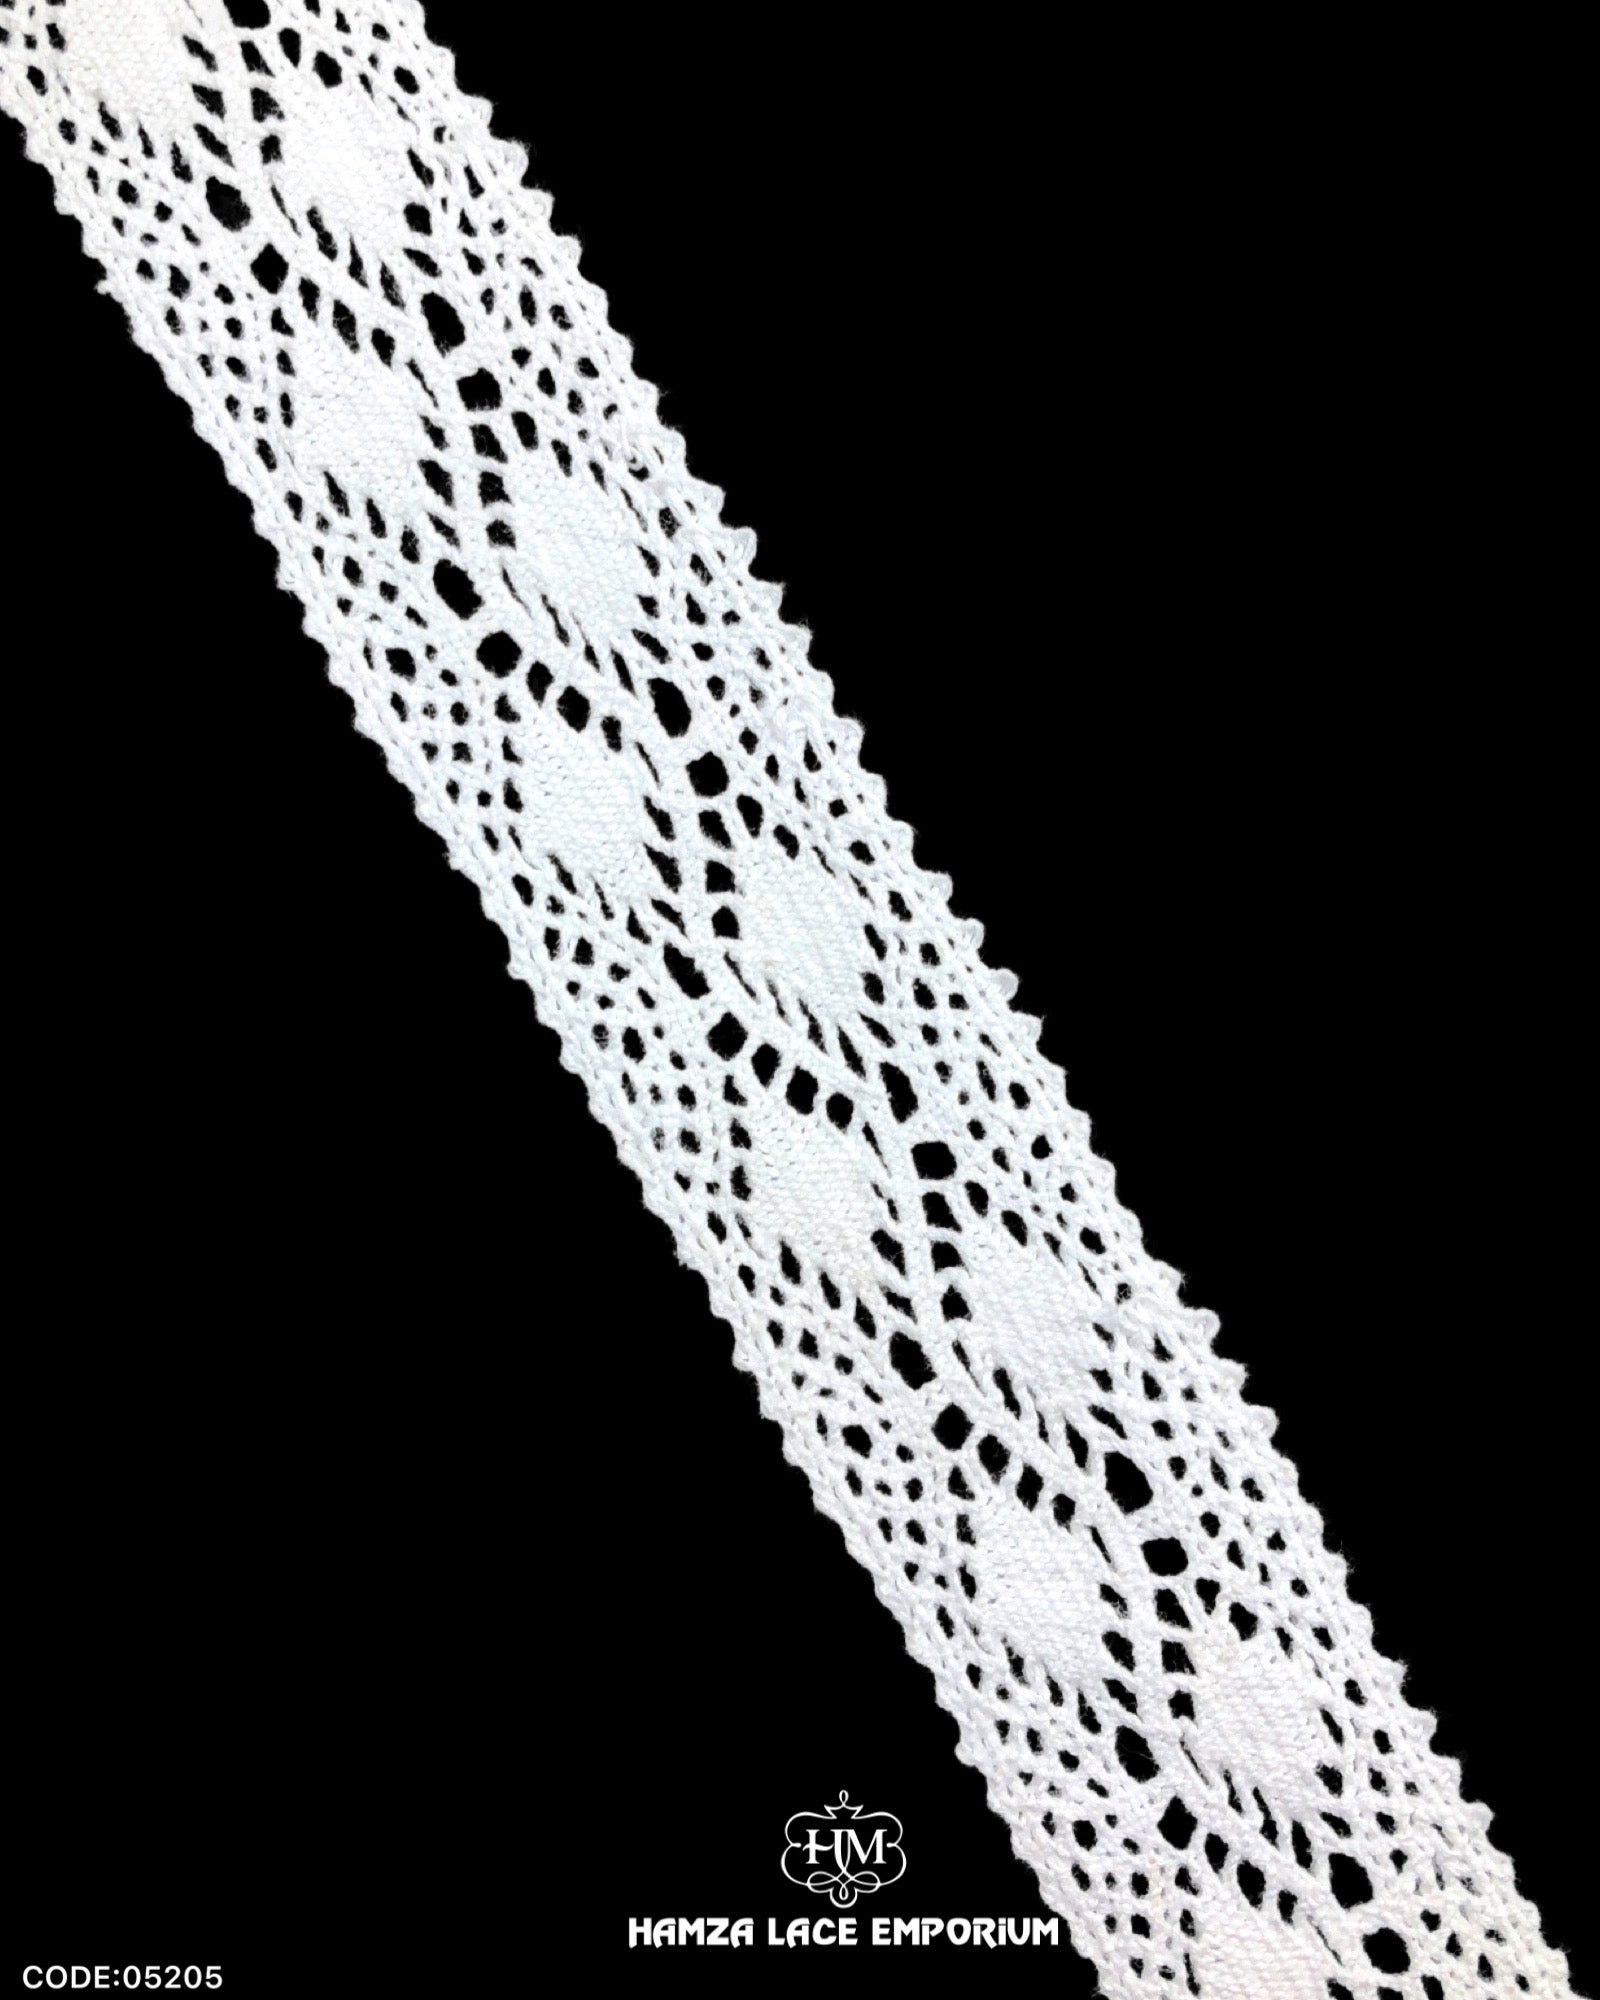 'Center Filling Crochet Lace 05205' with the name 'Hamza Lace' written at the bottom